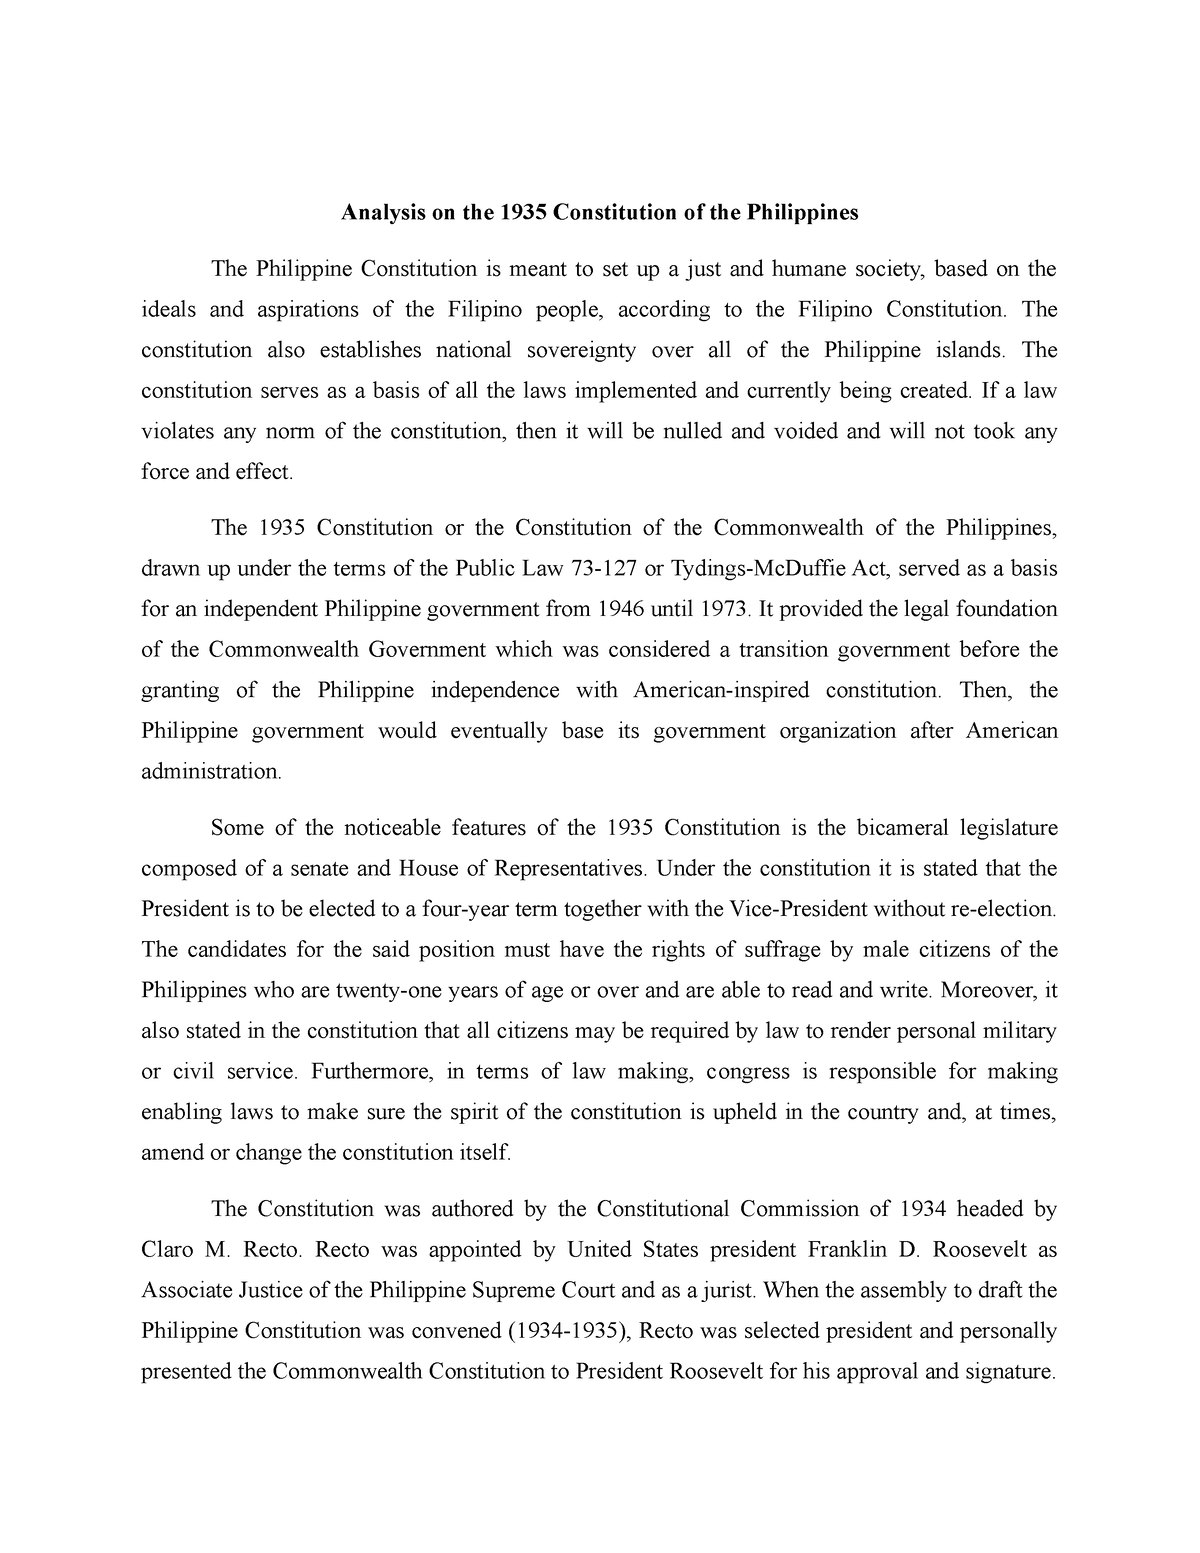 essay questions about philippine constitution